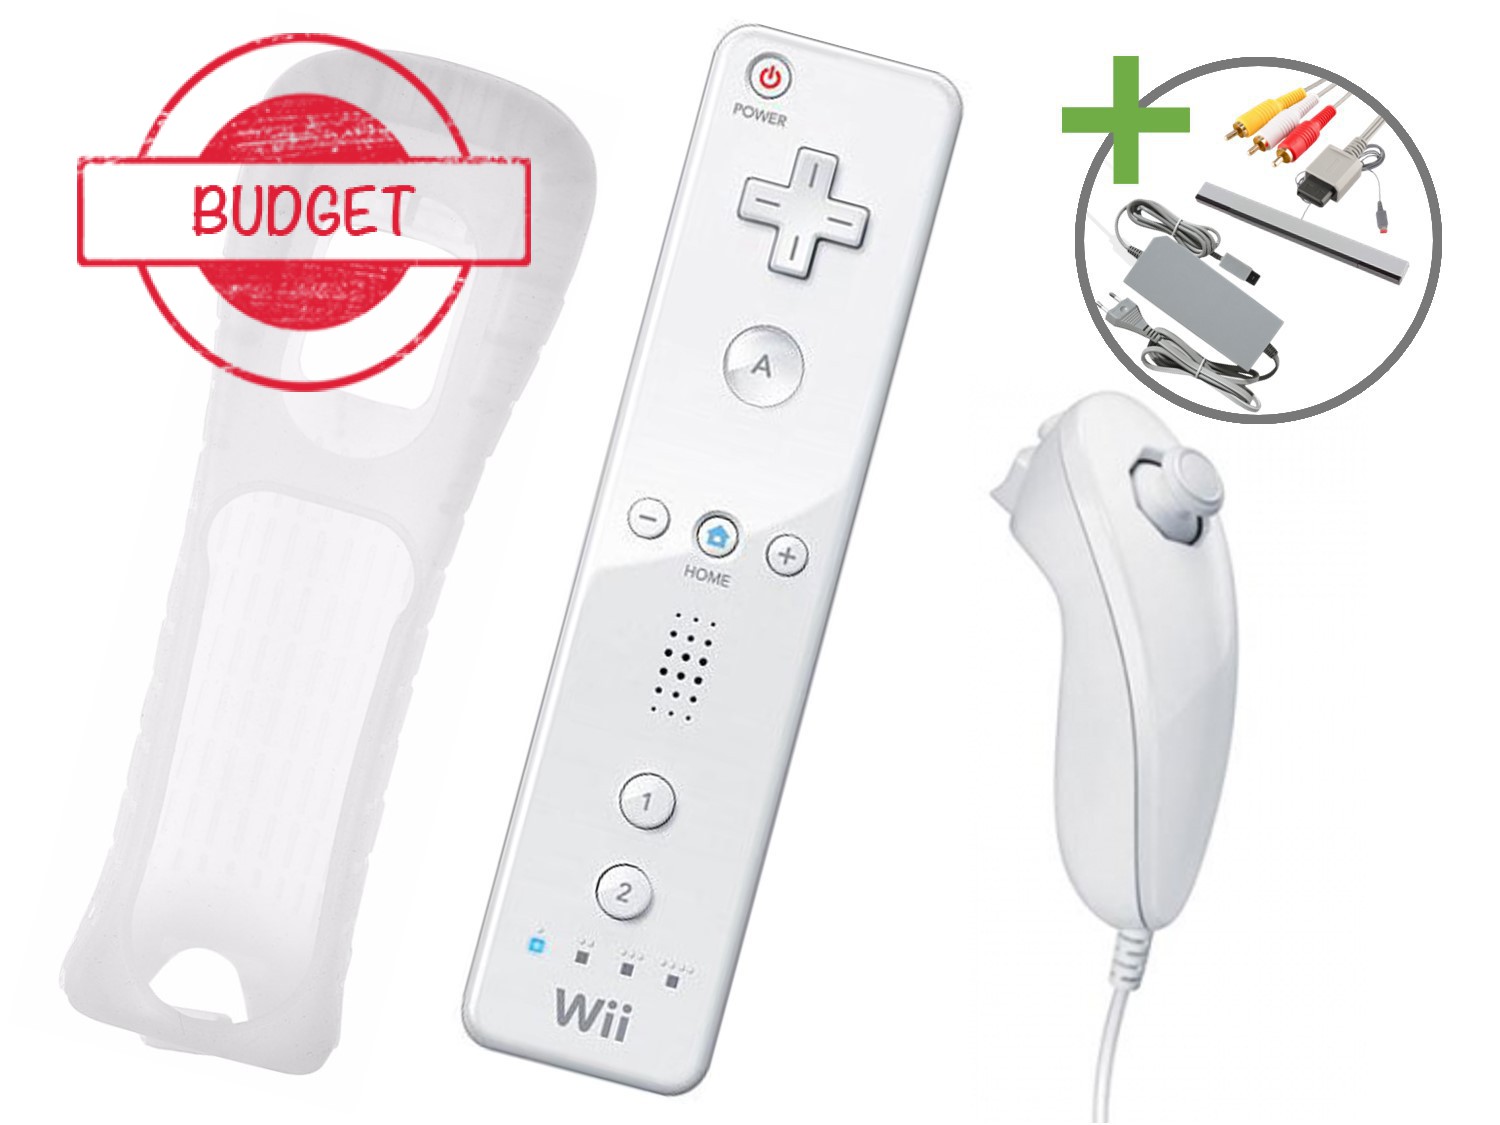 Nintendo Wii Starter Pack - Wii Fit Plus Edition - Budget - Wii Hardware - 3